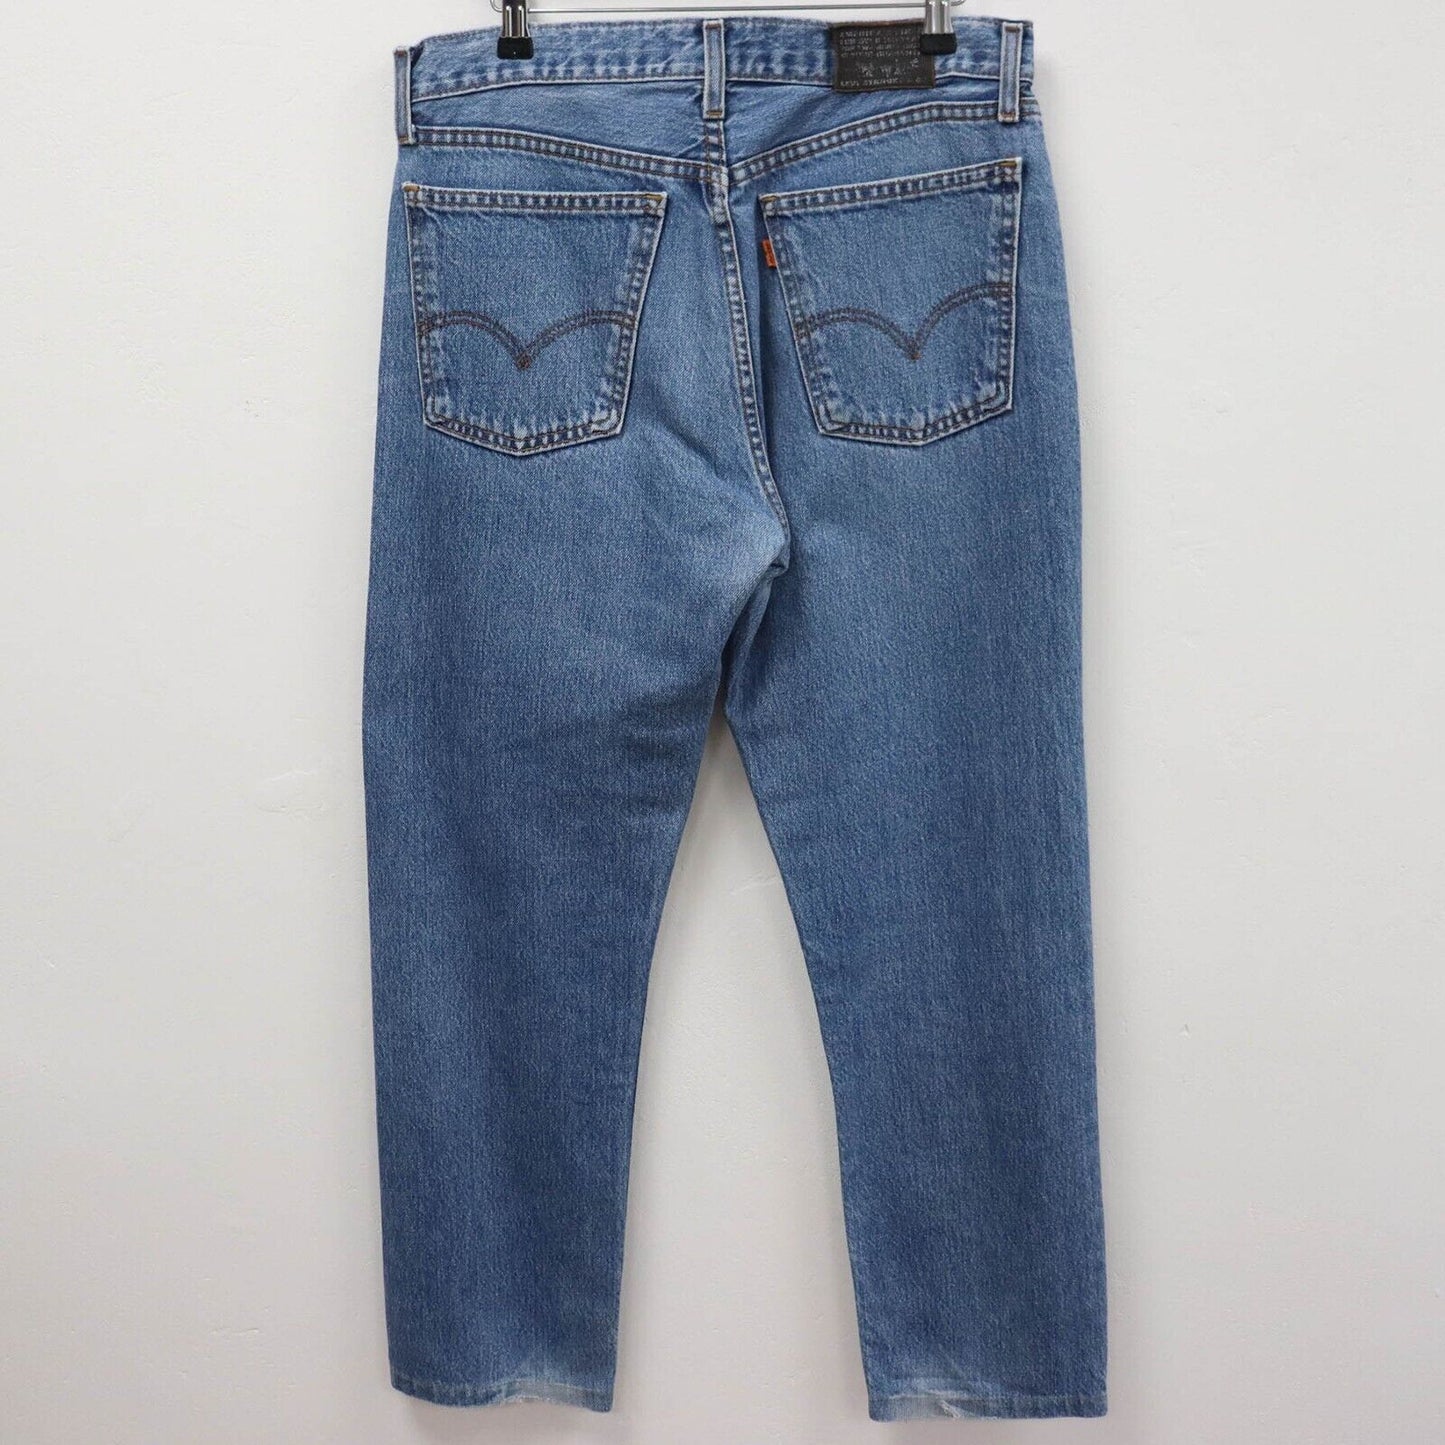 90s Levi’s 611 Mom Fit Jeans Size UK14 L28